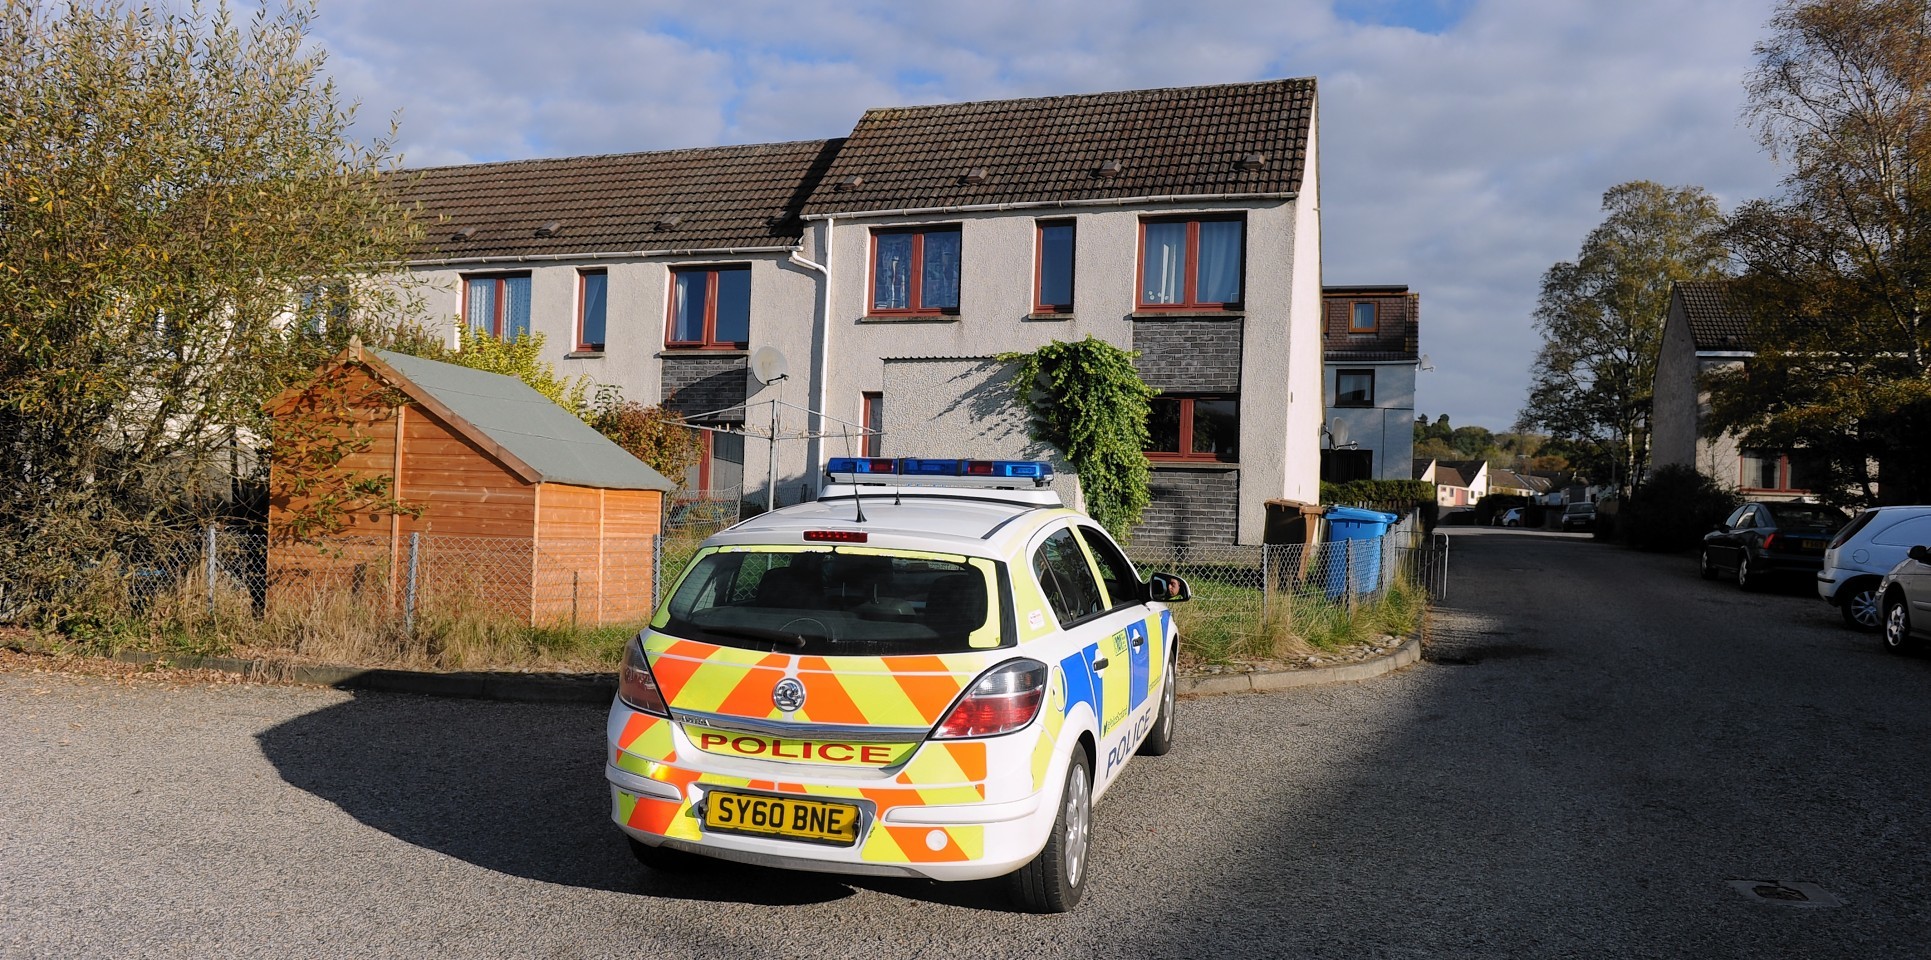 The scene of the incident on Deas Avenue in Dingwall